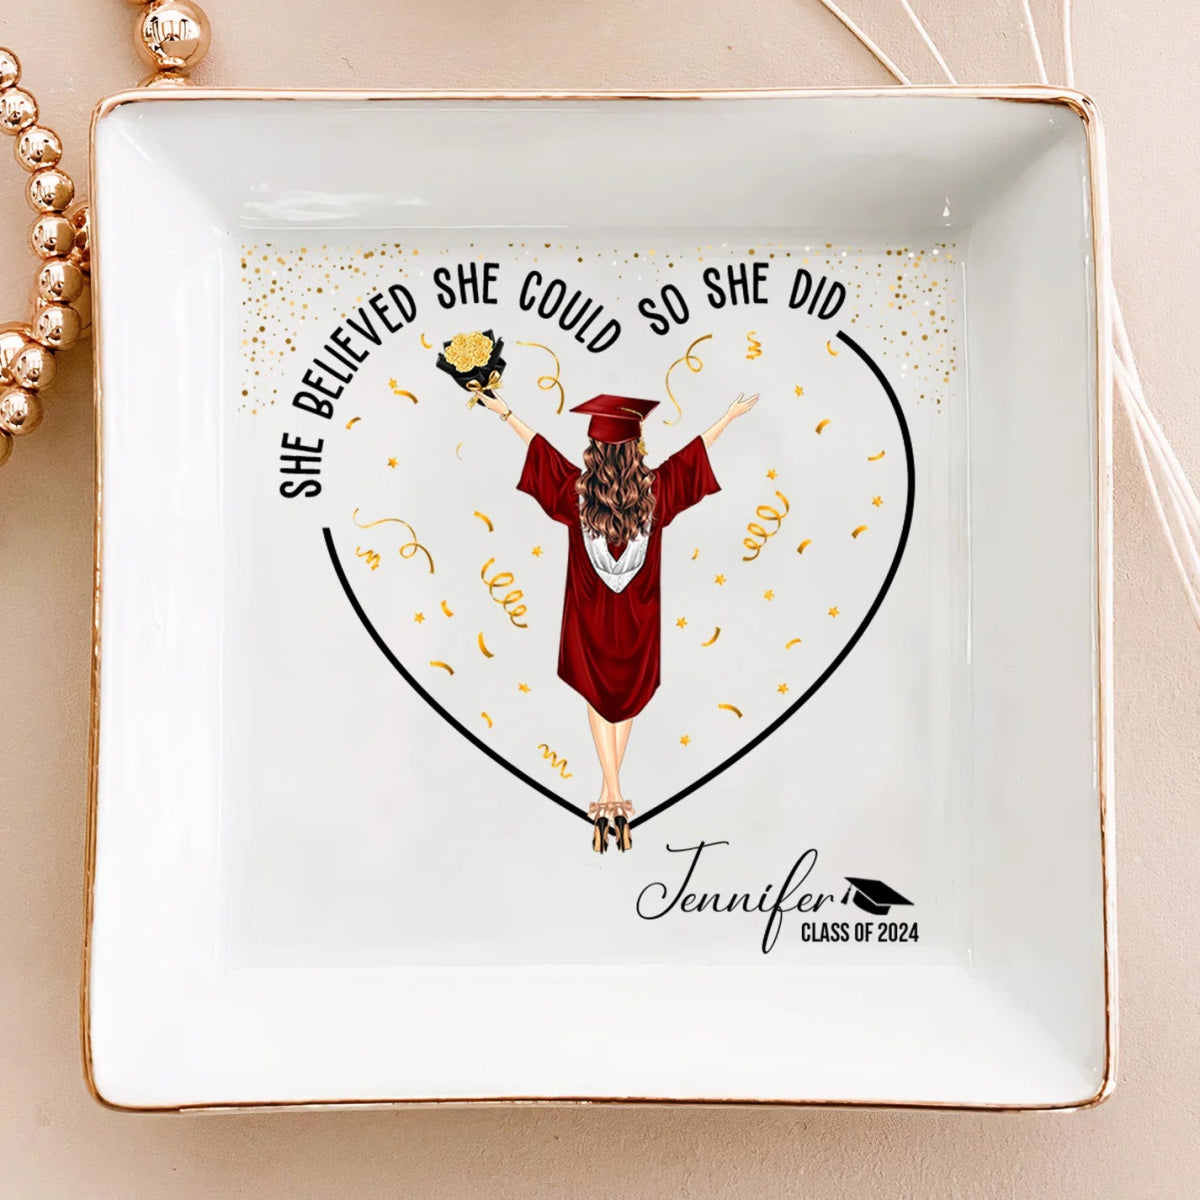 Graduation Gifts She Believed She Could So She Did - Personalized Jewelry Dish - The Next Custom Gift